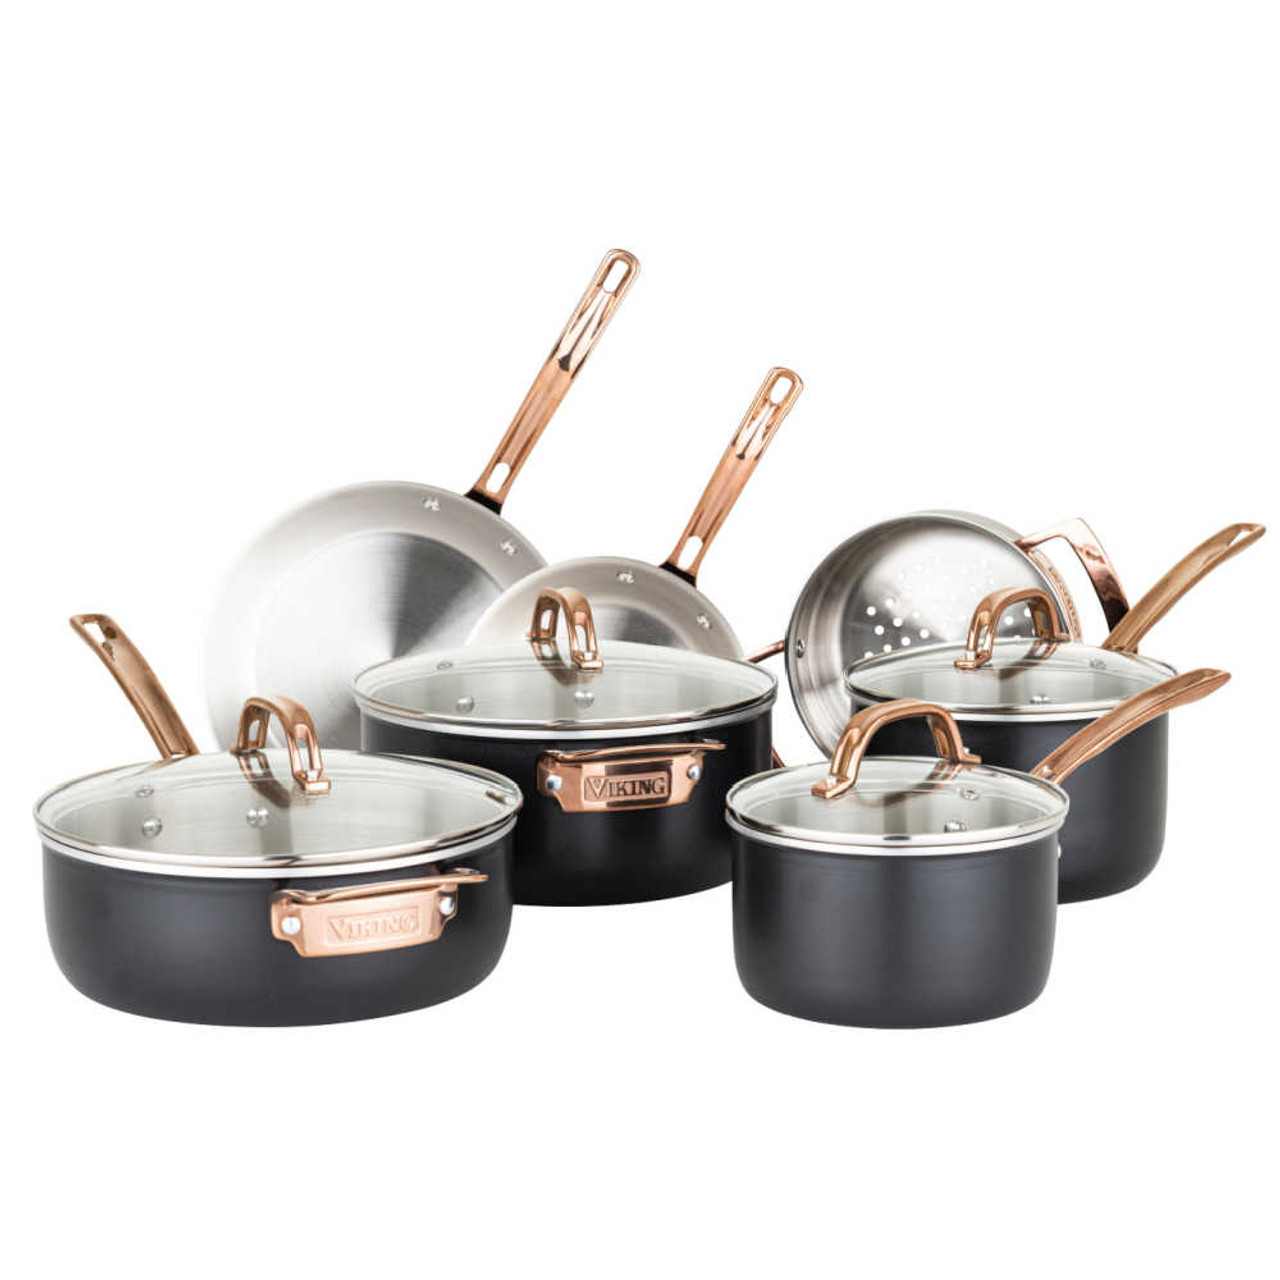 https://cdn11.bigcommerce.com/s-hccytny0od/images/stencil/1280x1280/products/4844/19853/Viking_Matte_Black_and_Copper_11-Piece_Cookware_Set_12__66919.1656363418.jpg?c=2?imbypass=on